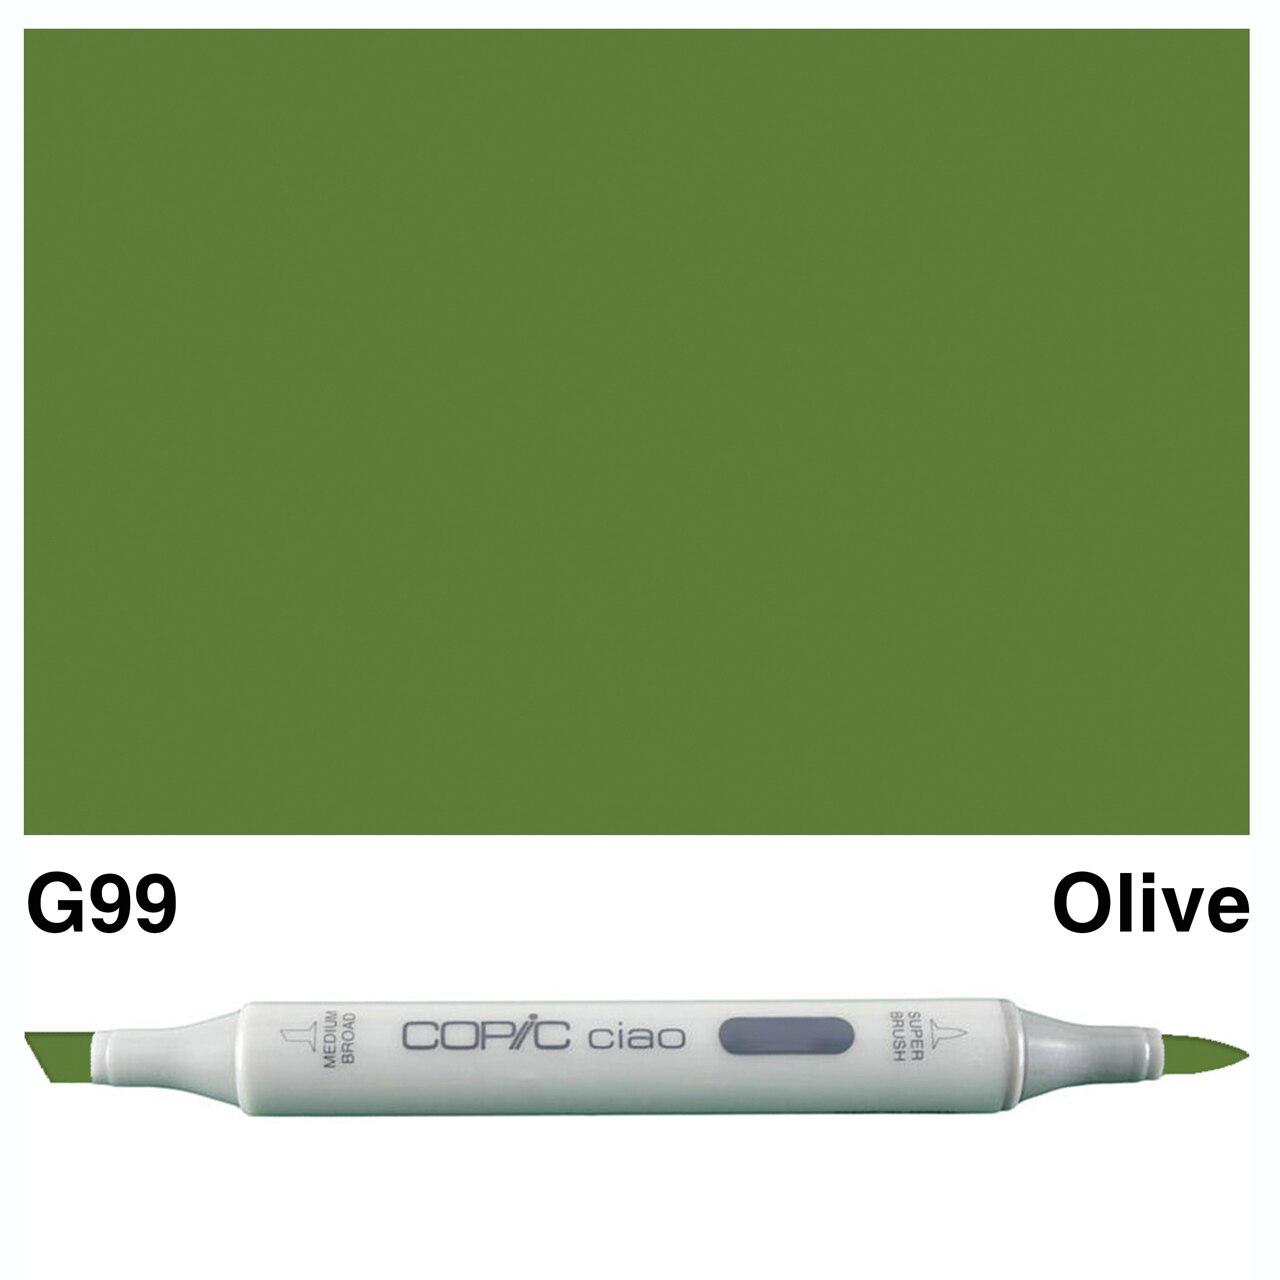 Copic - Ciao Marker - Olive - G99-ScrapbookPal